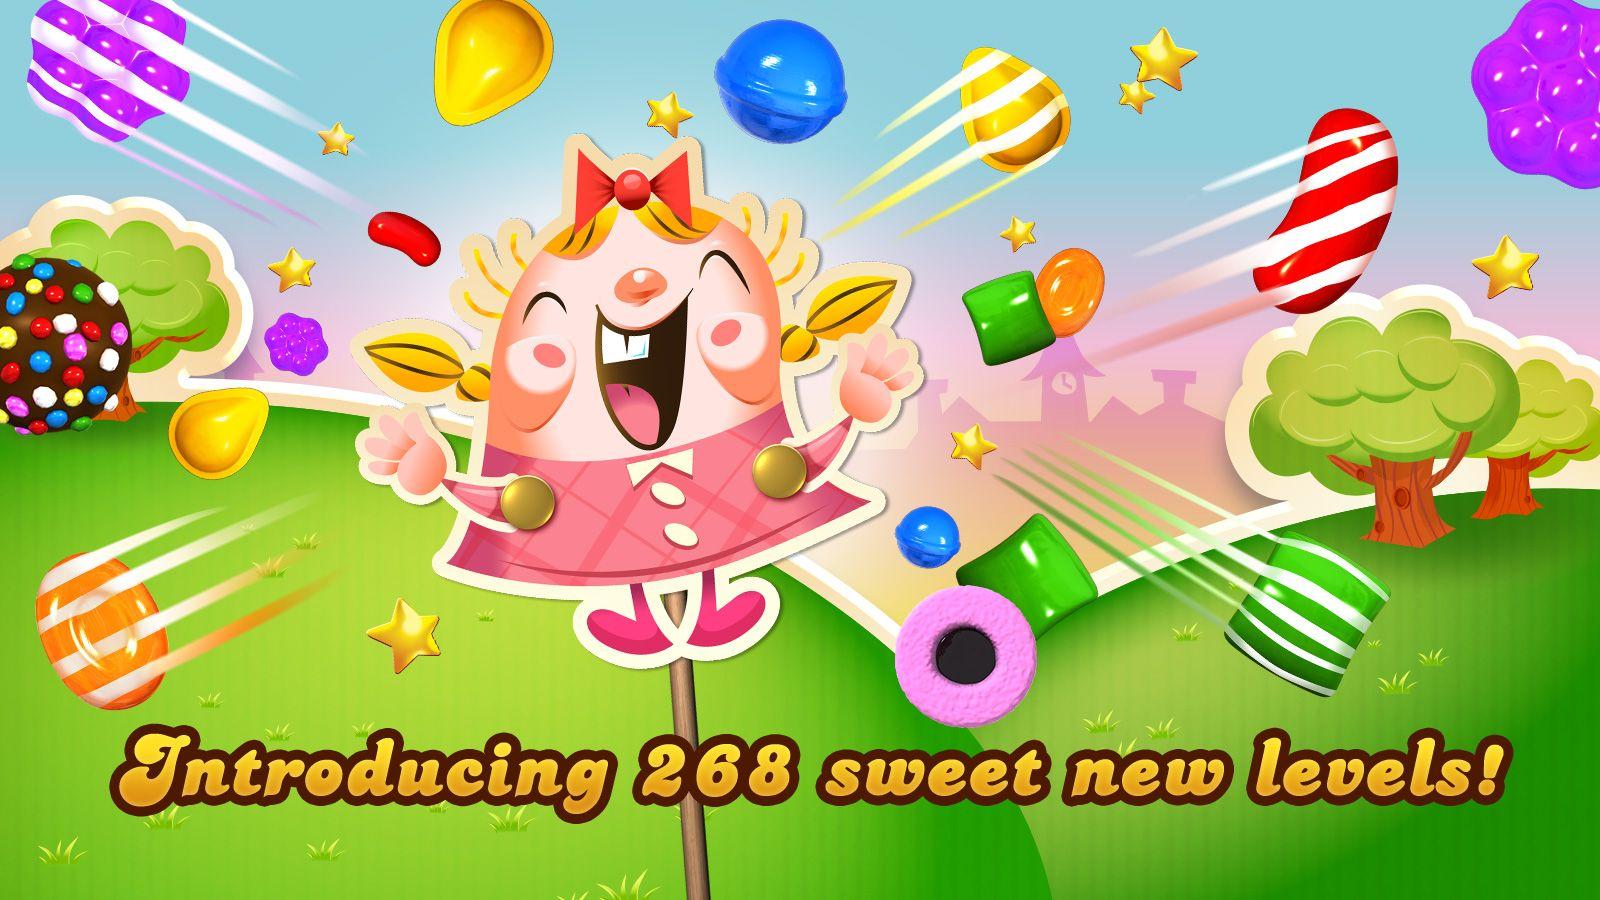 Update to Candy Crush Saga for Windows Phone brings new episodes